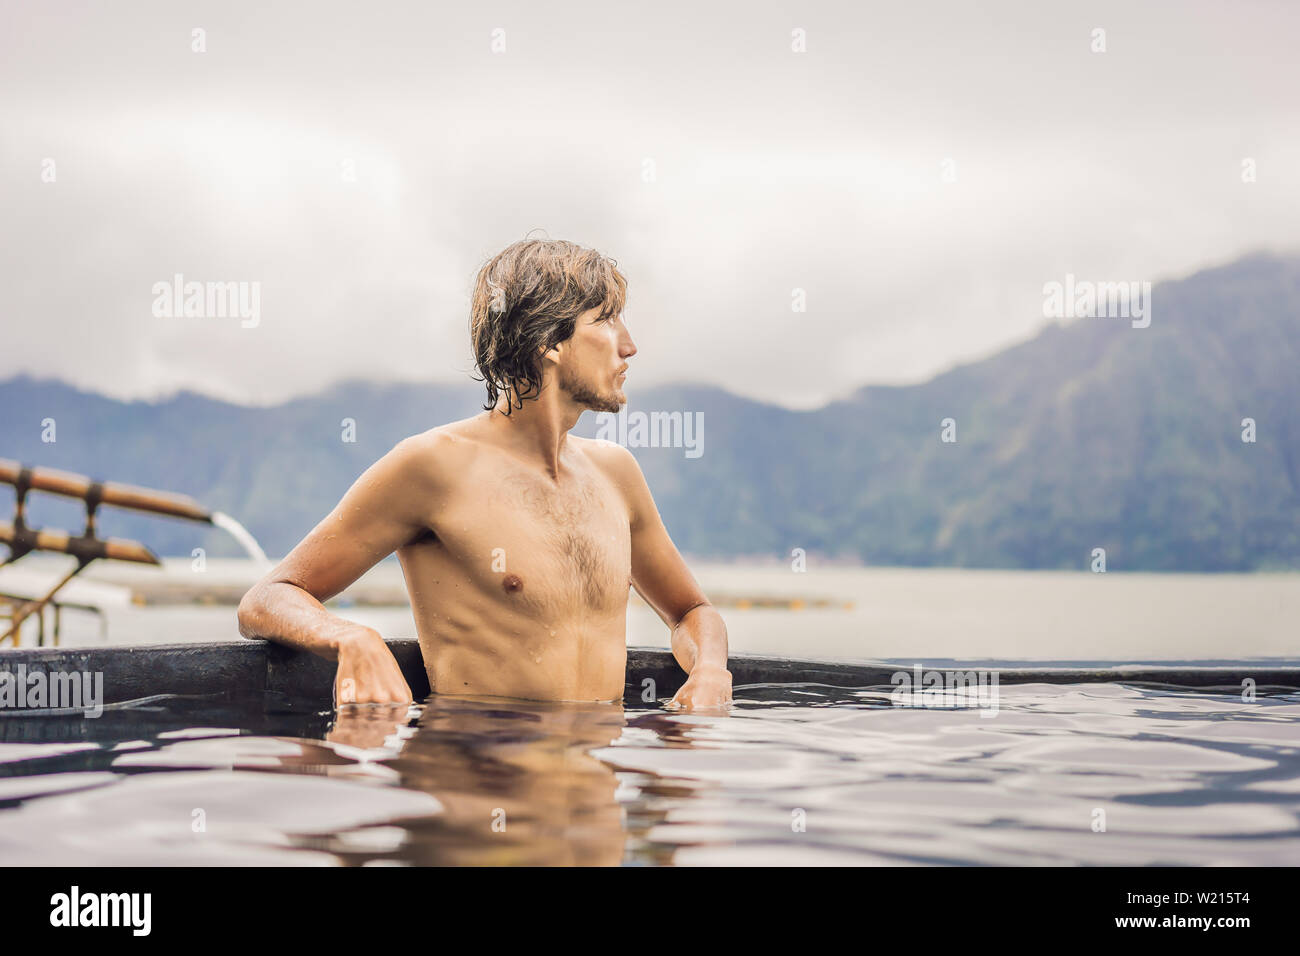 Geothermal spa. Man relaxing in hot spring pool. Young man enjoying bathing relaxed in a blue water lagoon, tourist attraction Stock Photo